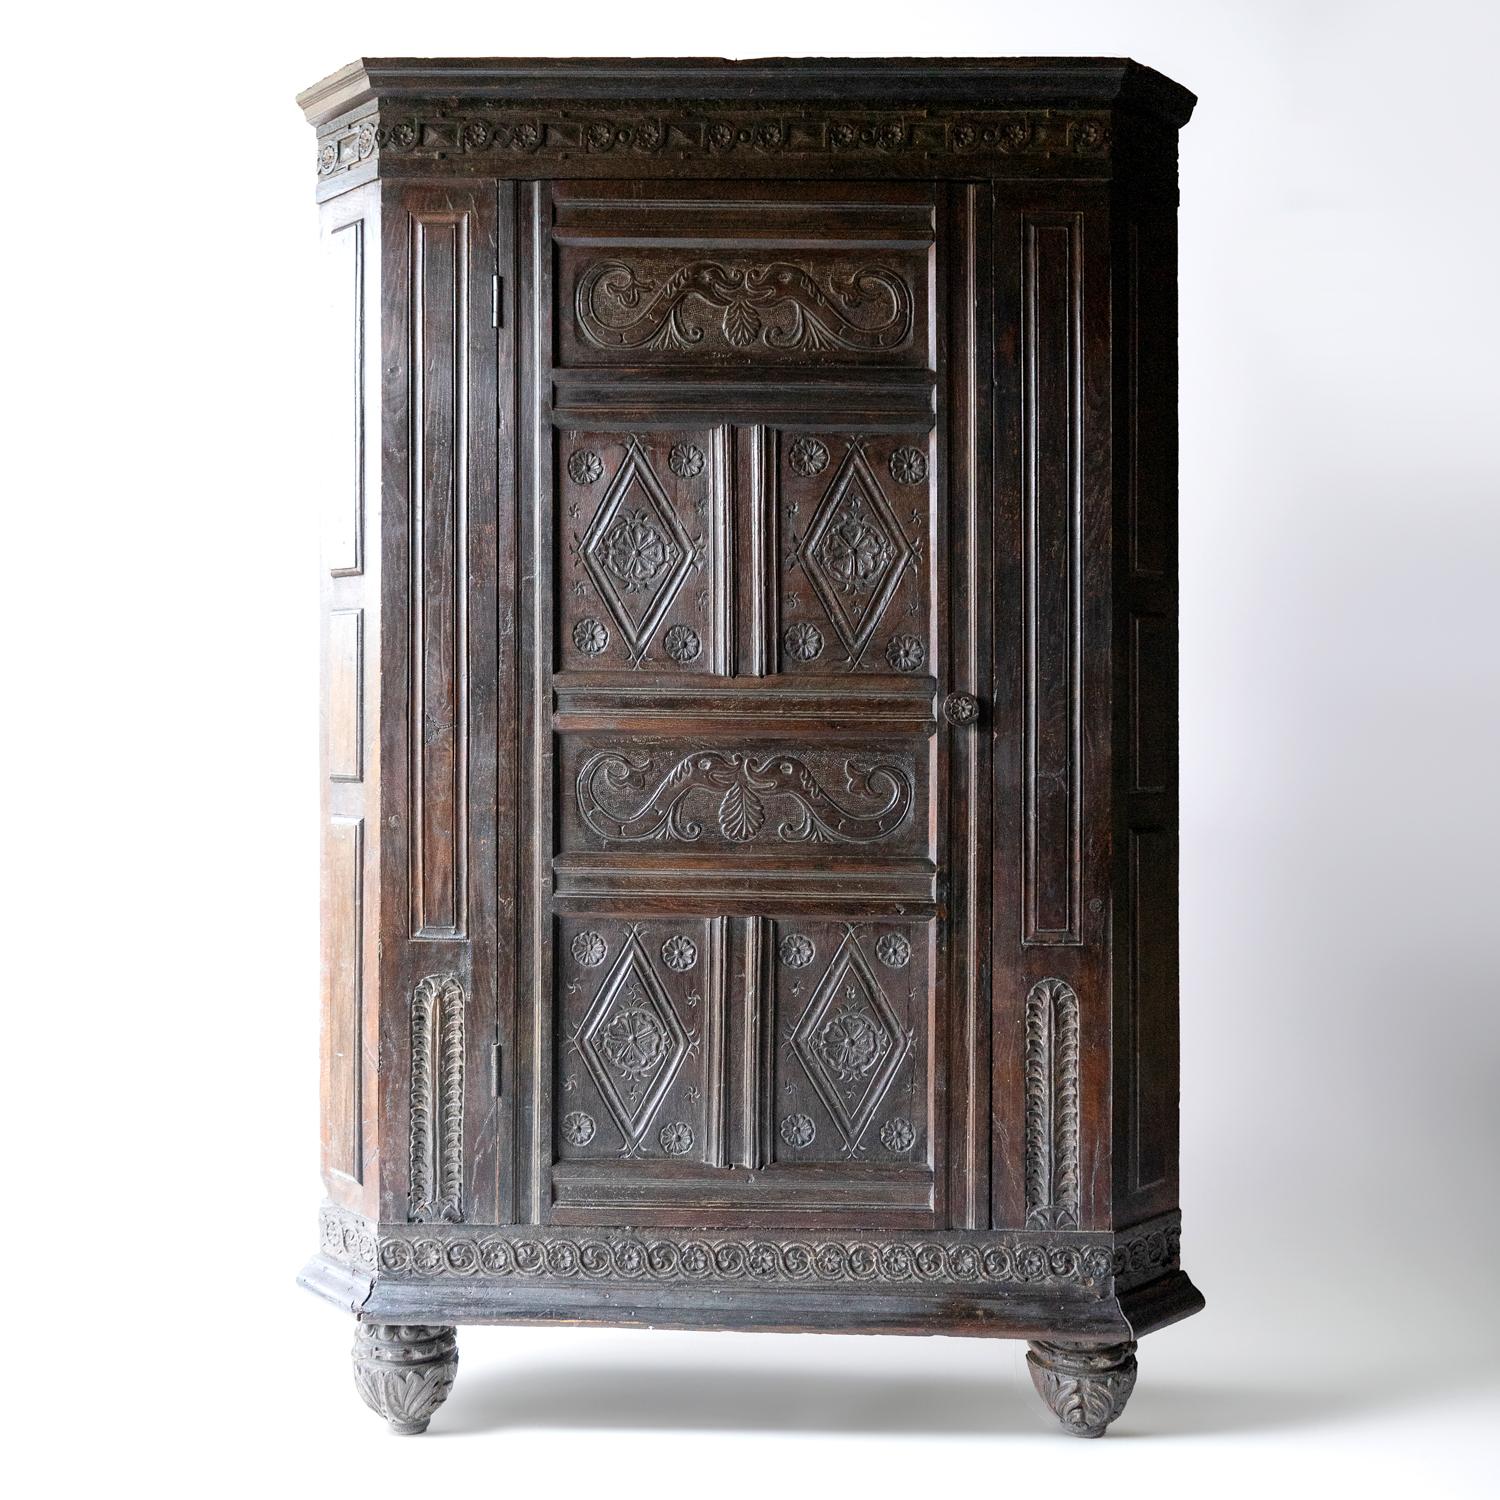 ANTIQUE PRIMITIVE OAK CORNER CUPBOARD 
A country-made piece with charming folk art style carving depicting stylised dolphins, roses and geometric patterns. 

Raised on bulbous, carved feet. 

Made from solid oak with a wonderfully rich patina.